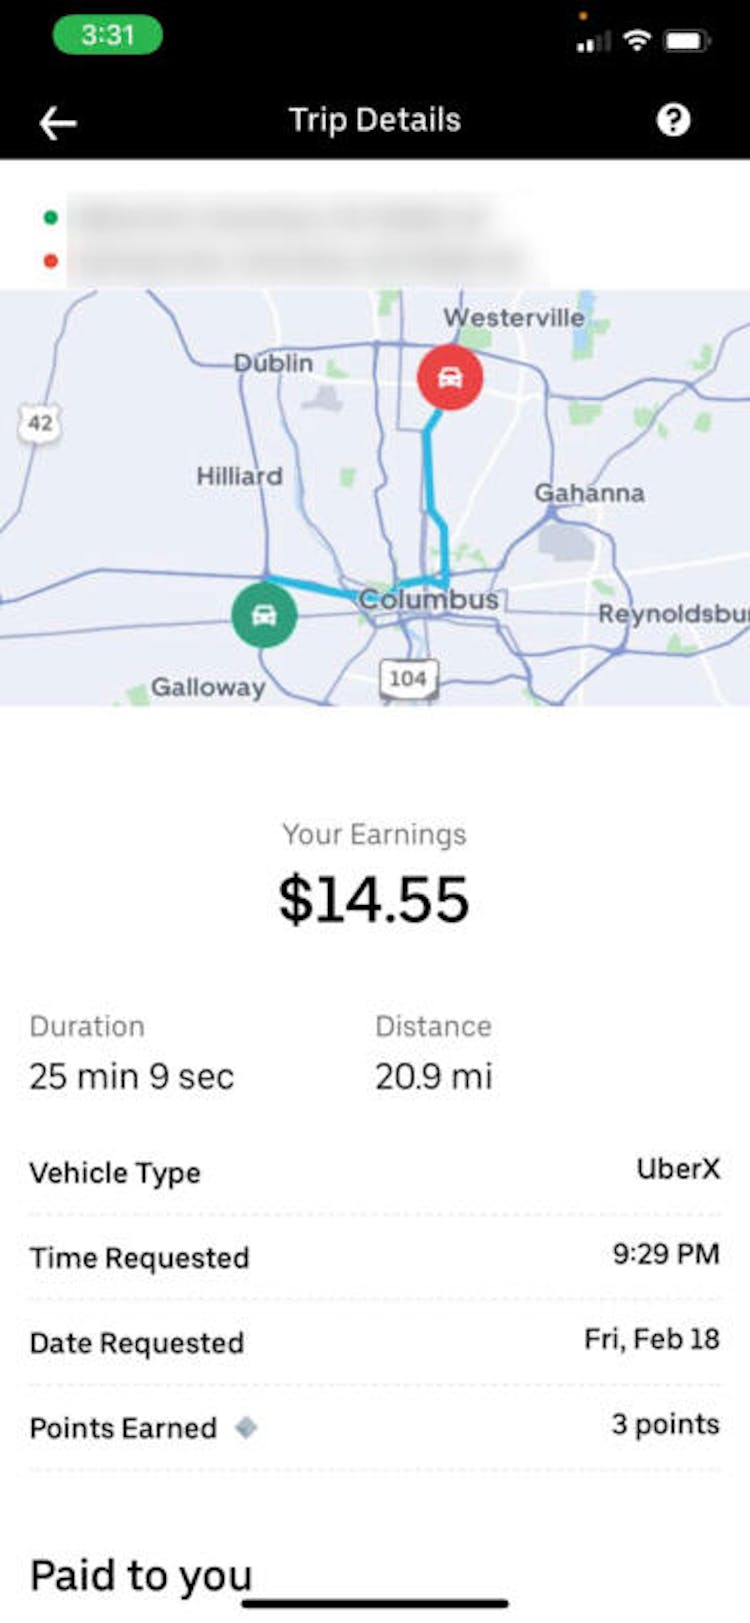 Screenshot of an Uber trip that shows $14.55 in earnings. Source: Uber